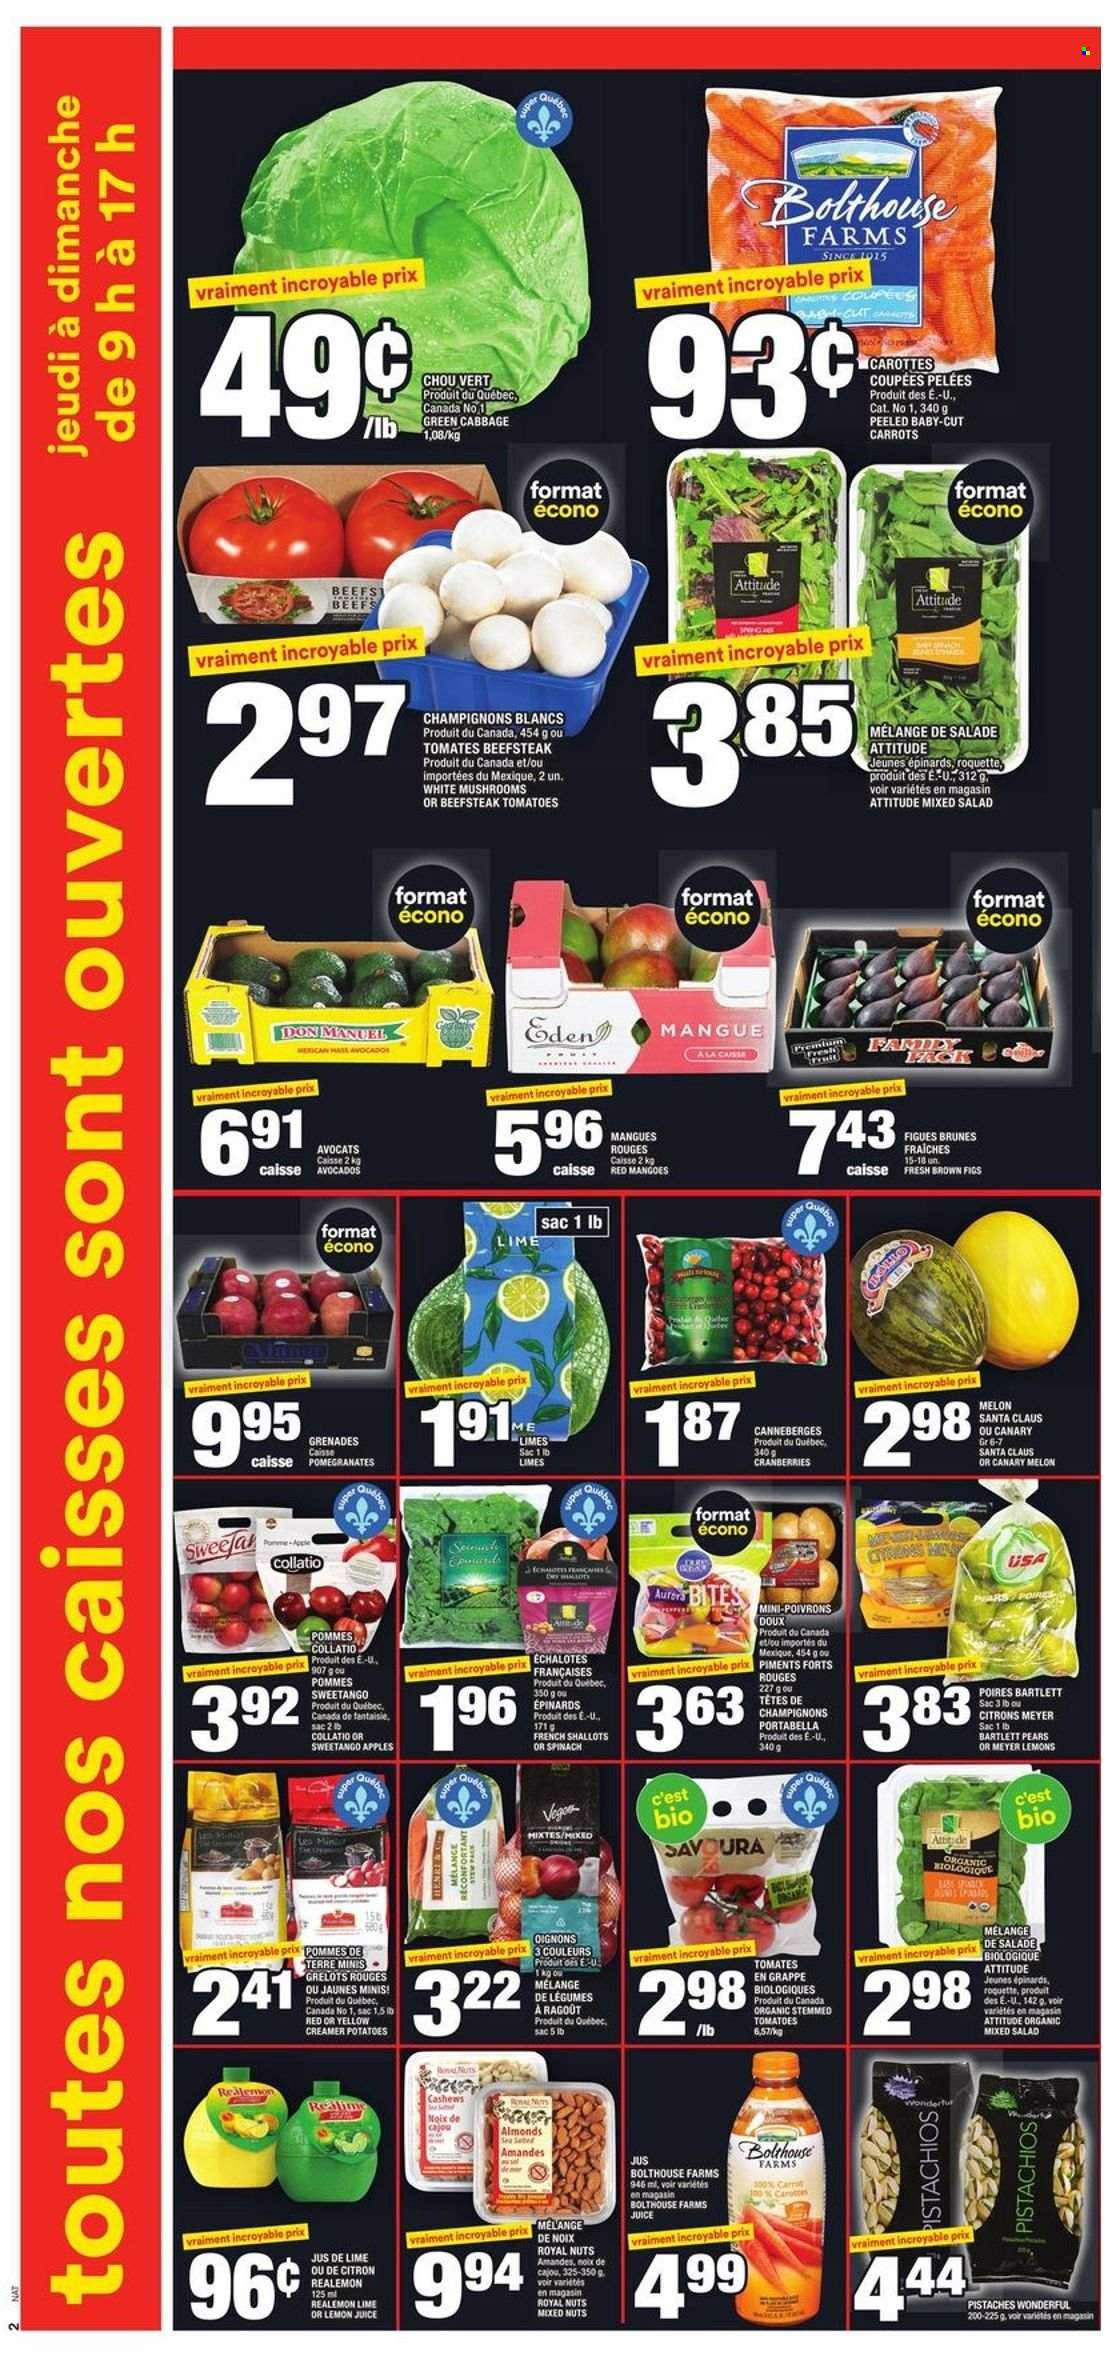 thumbnail - Super C Flyer - December 02, 2021 - December 08, 2021 - Sales products - mushrooms, cabbage, carrots, shallots, spinach, tomatoes, potatoes, salad, apples, avocado, Bartlett pears, figs, limes, pears, melons, pomegranate, Santa, cranberries, almonds, cashews, pistachios, mixed nuts, lemon juice. Page 3.